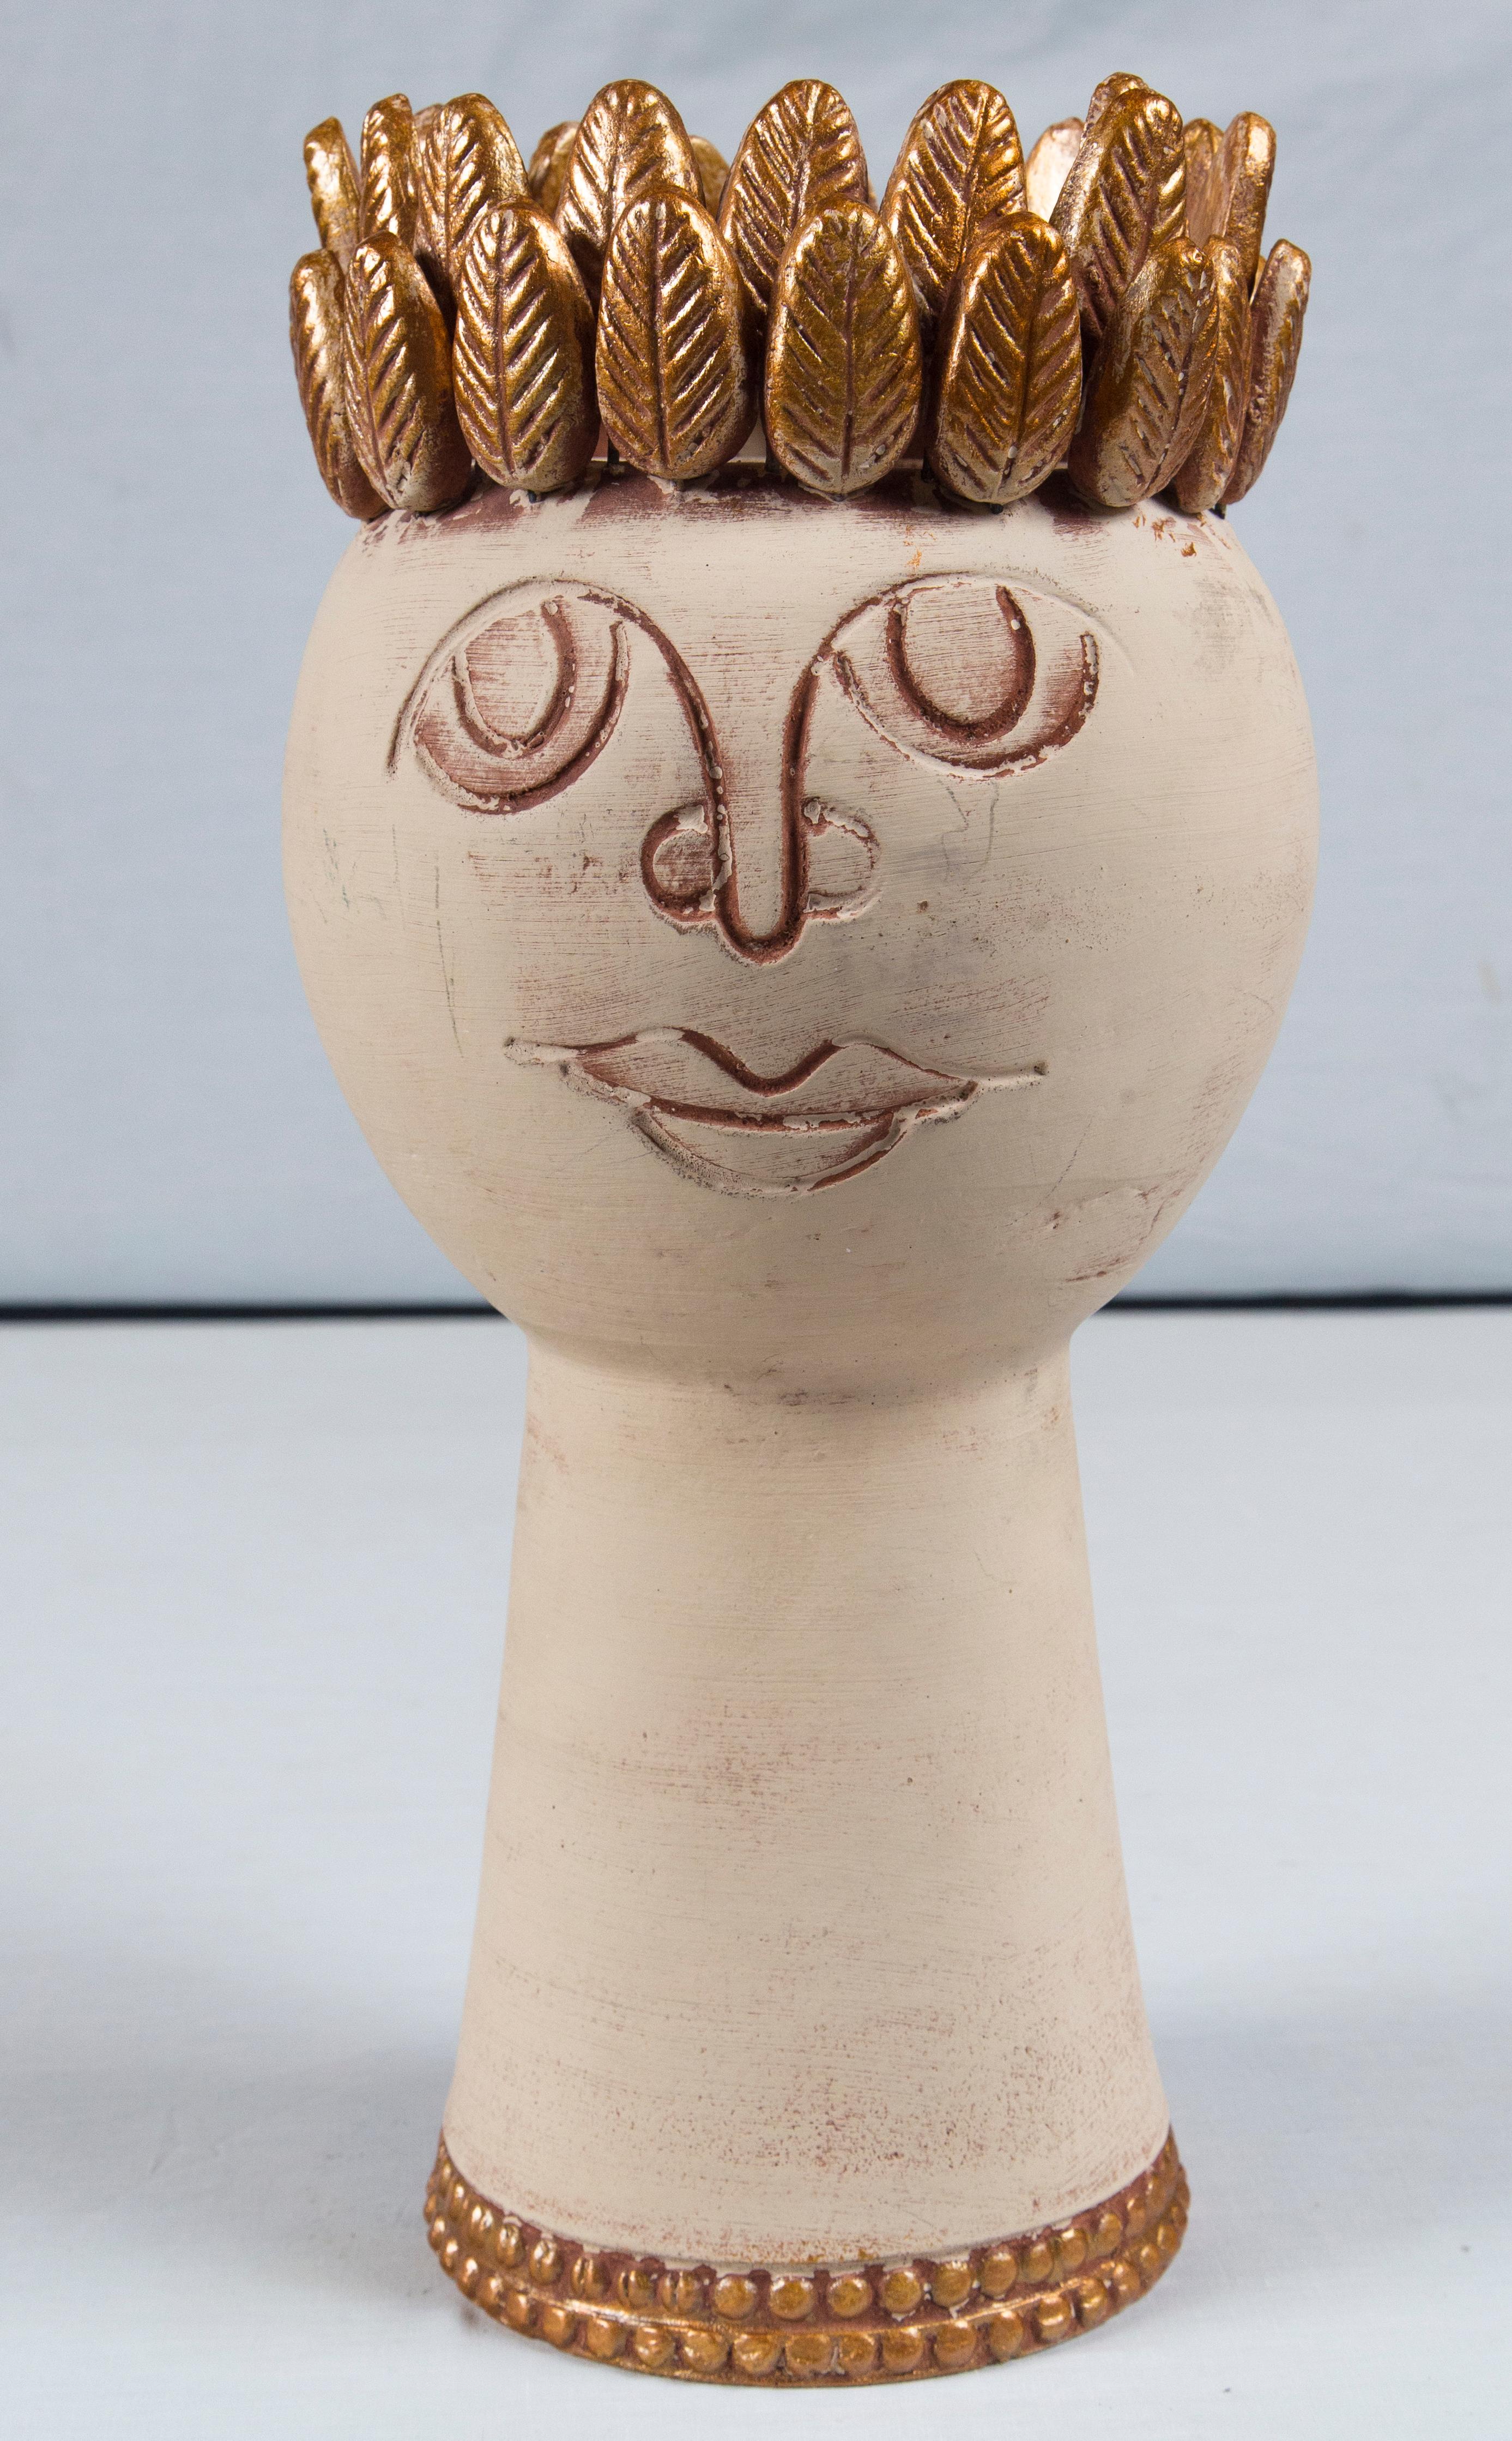 Handmade pottery head vessel, off-white and bronze colored with a bronze laurel leaf crown.